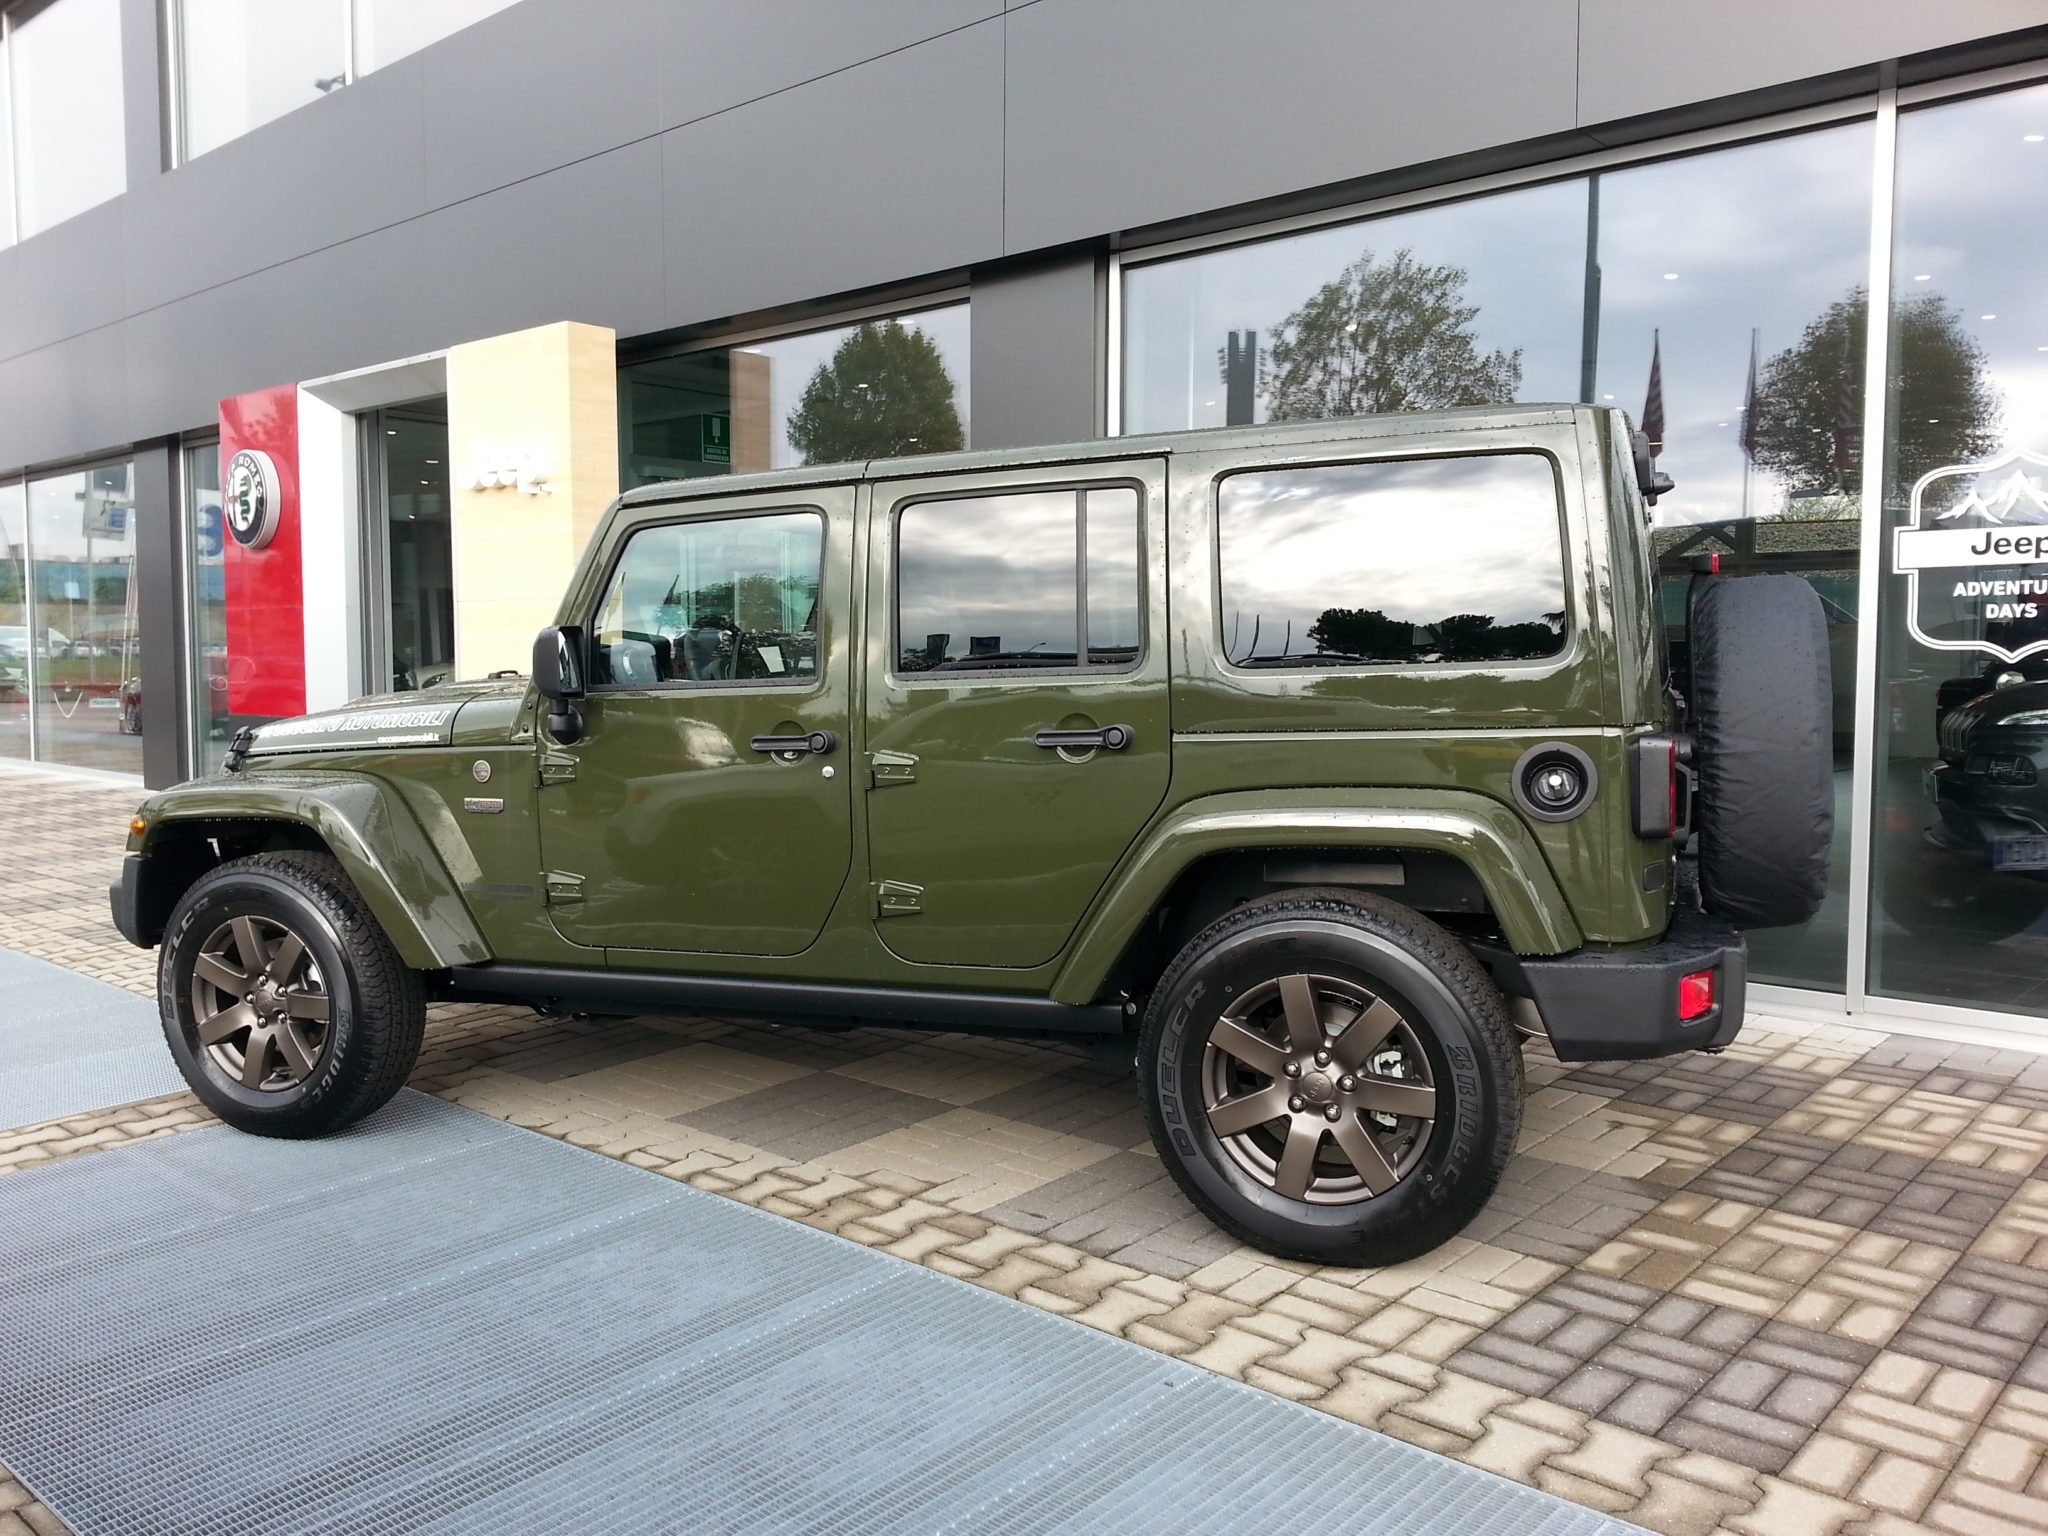 bao michael jordan s daughter s dreams were made a reality when he surprised her with a super rare jeep wrangler unlimited sahara 6551d4853bbe6 Michael Jordan's Daughter's Dreams Were Made A Reality When He Surprised Her With A Super Rare Jeep Wrangler Unlimited Sahara.